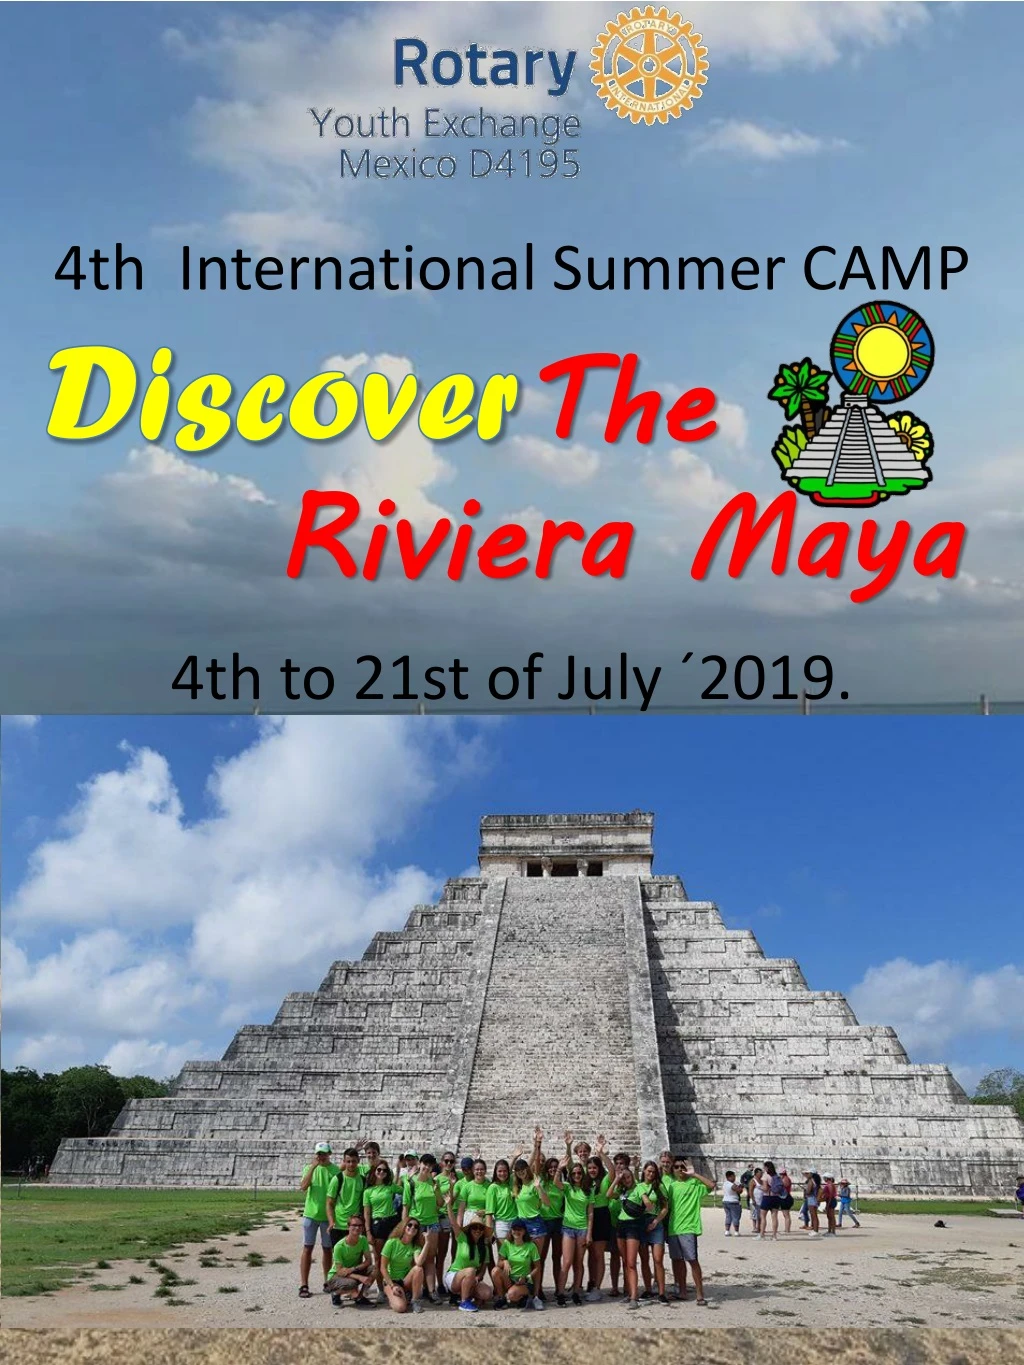 4th international summer camp 4th to 21st of july 2019